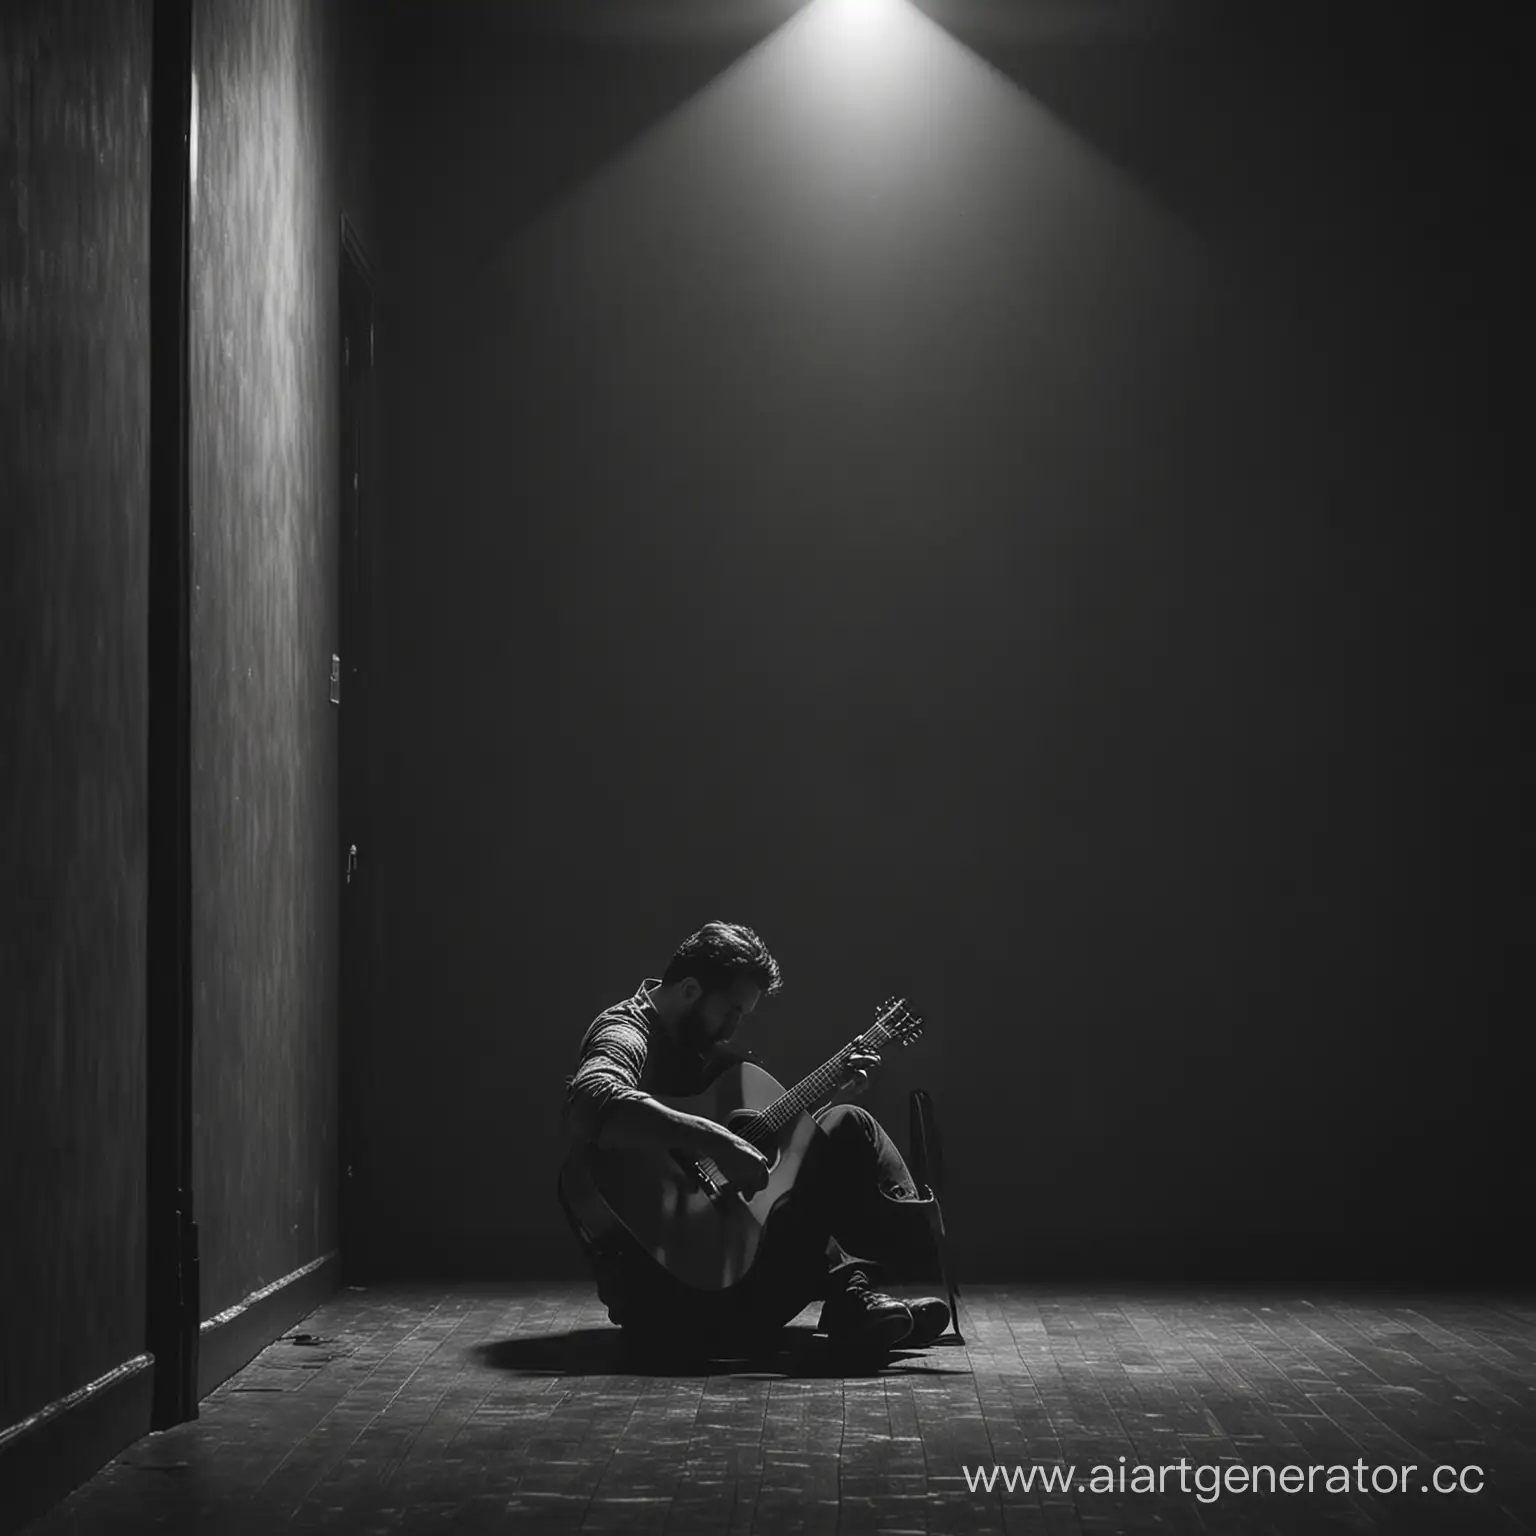 Lonely-Man-Playing-Guitar-in-Dimly-Lit-Room